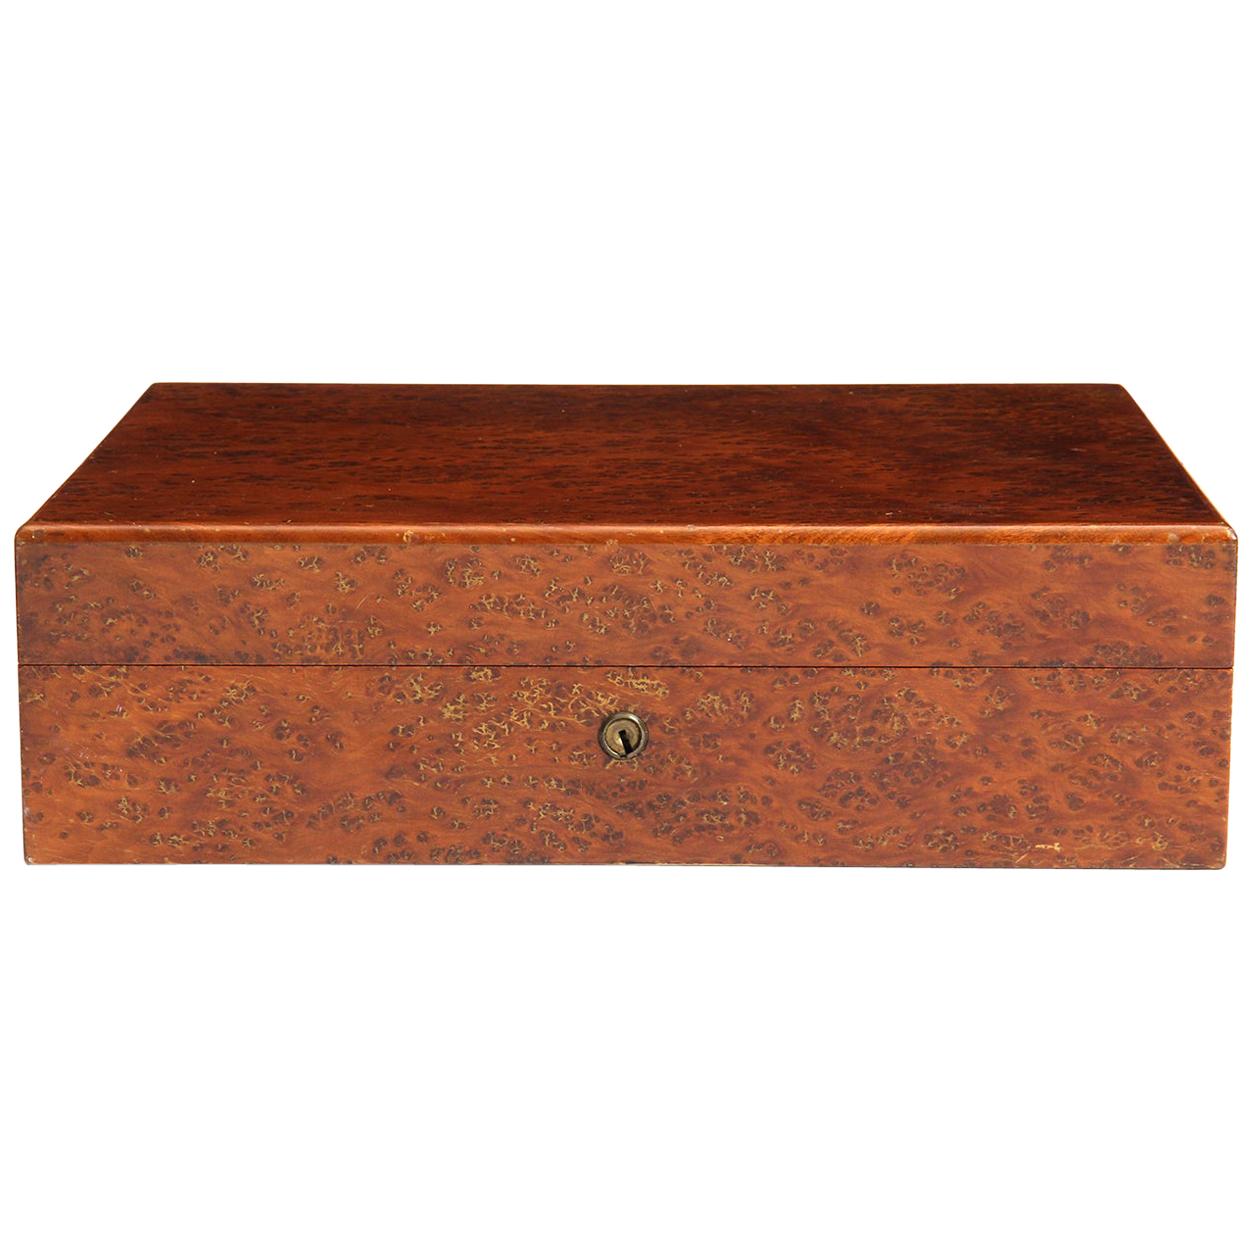 1950s Burled Maple Humidor For Sale